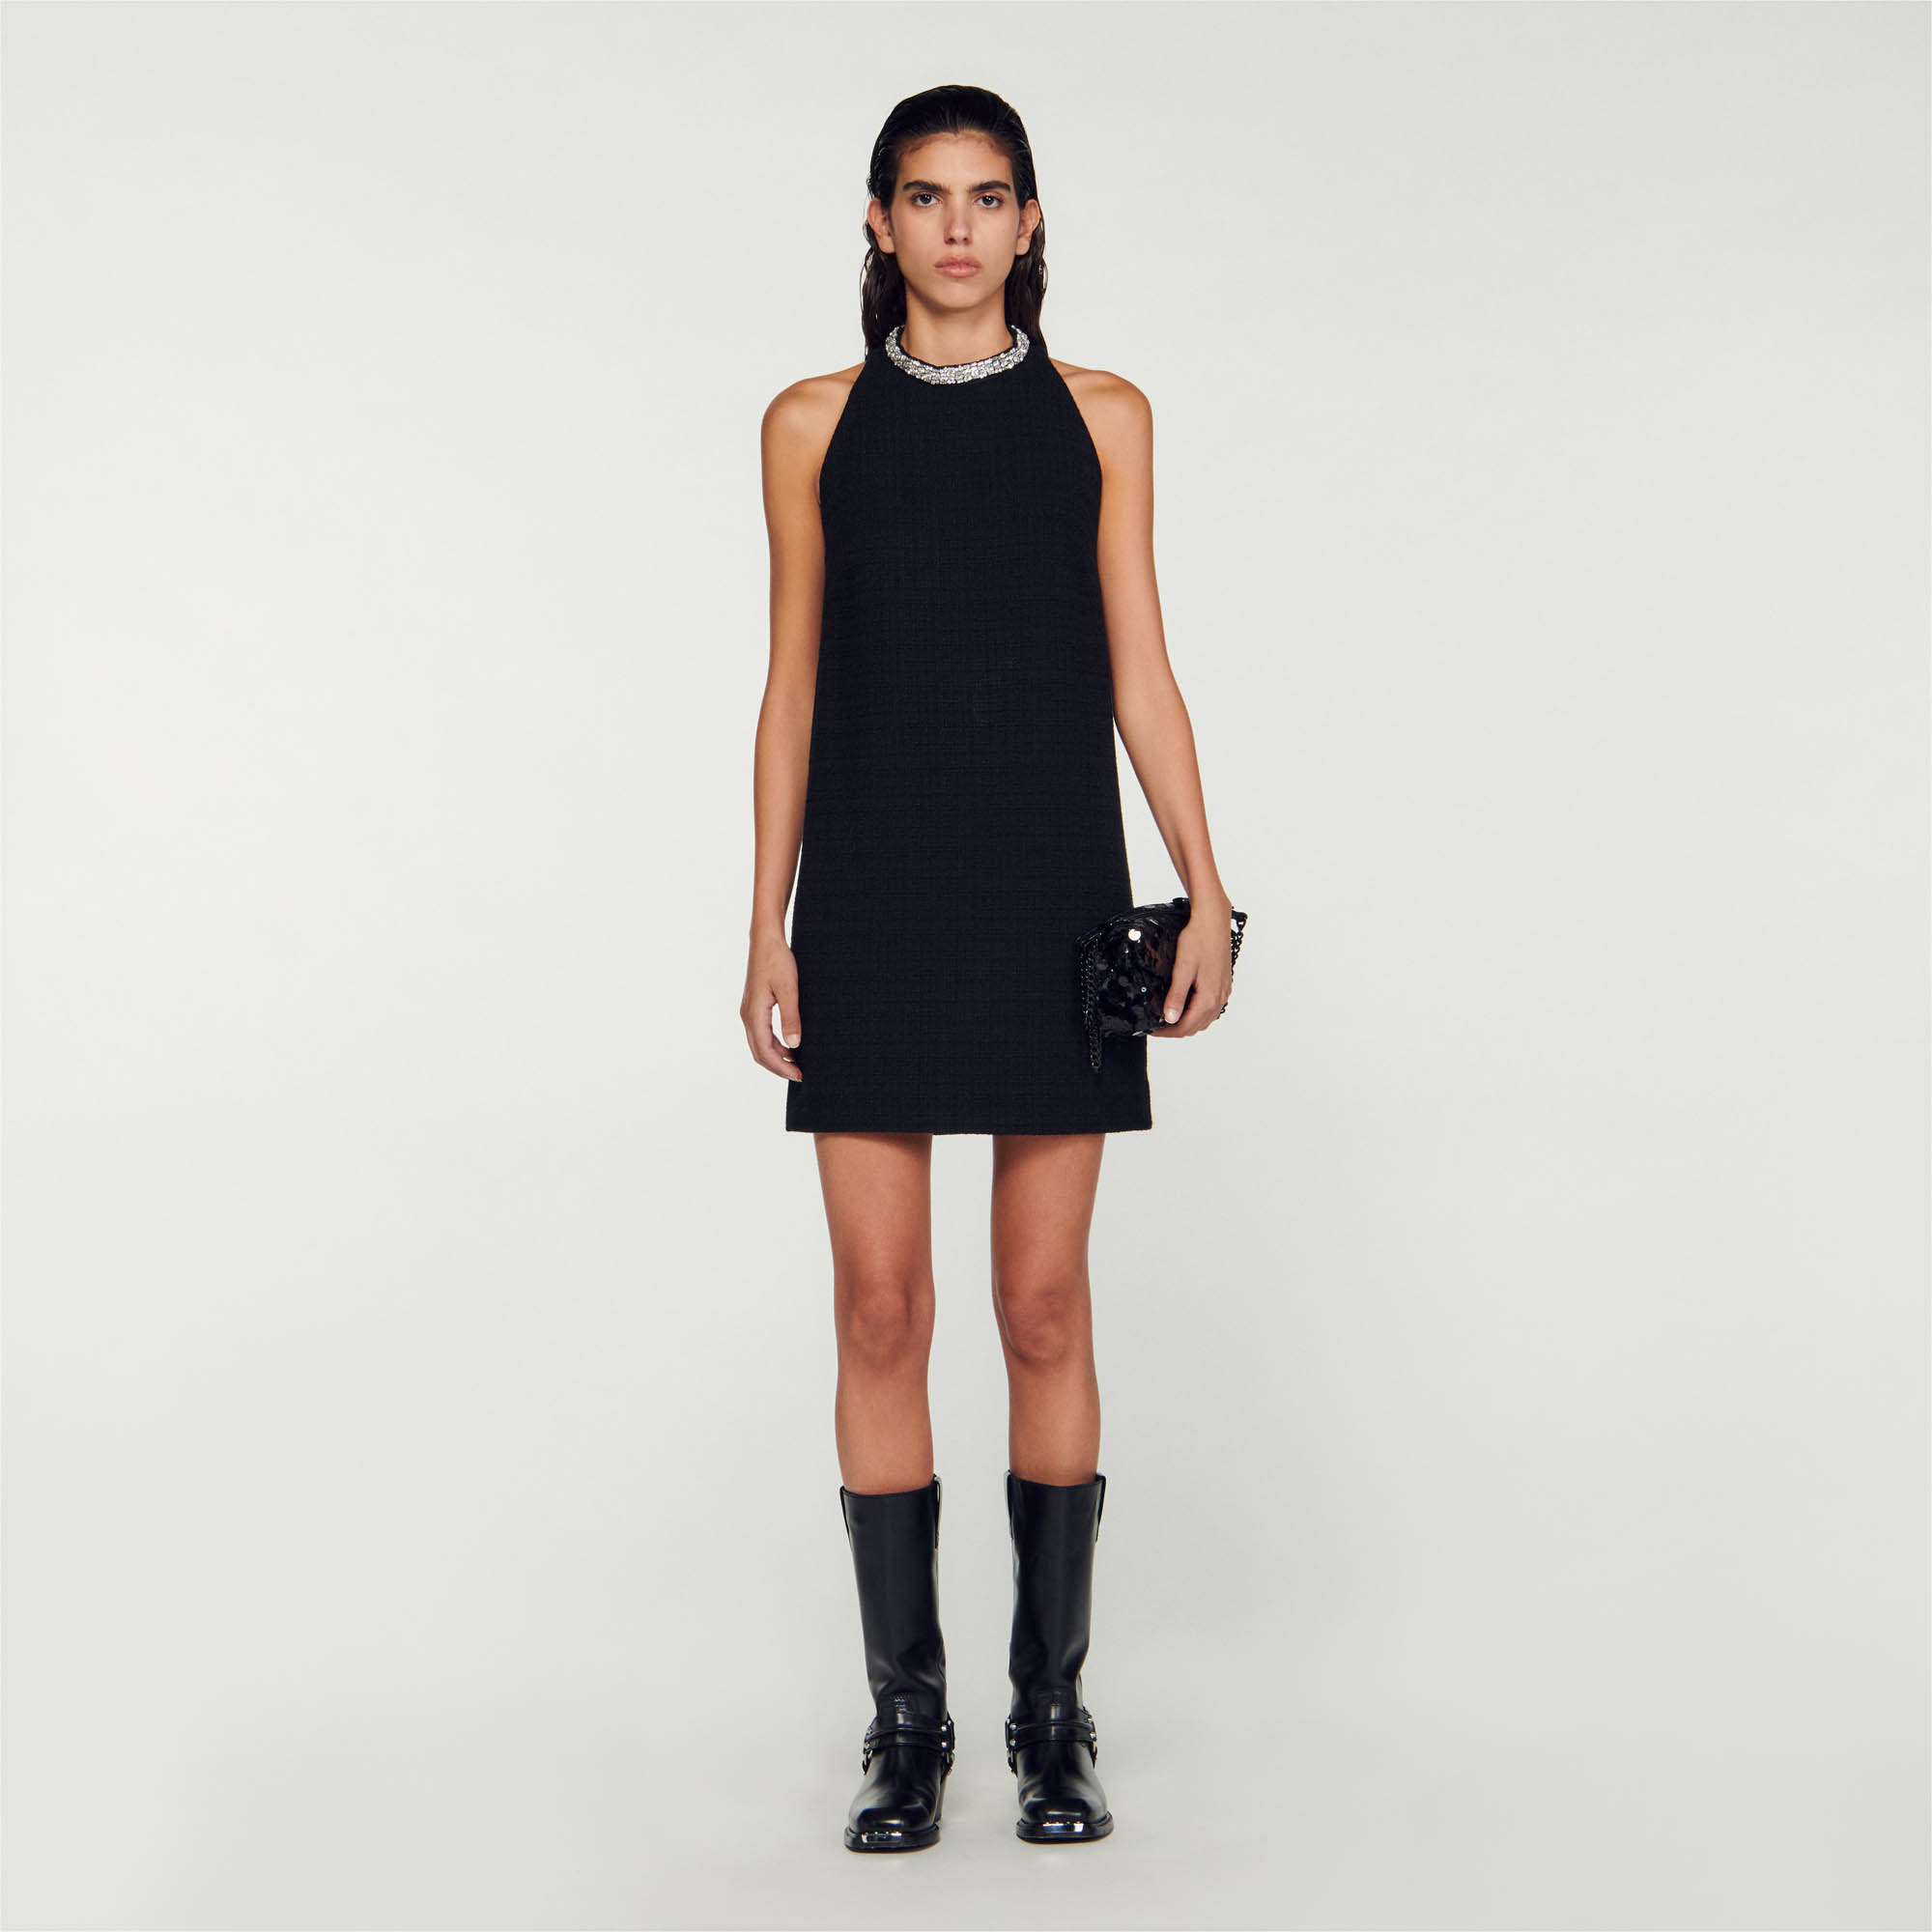 Sandro cotton Short tweed dress with a round collar embellished with jewelry details